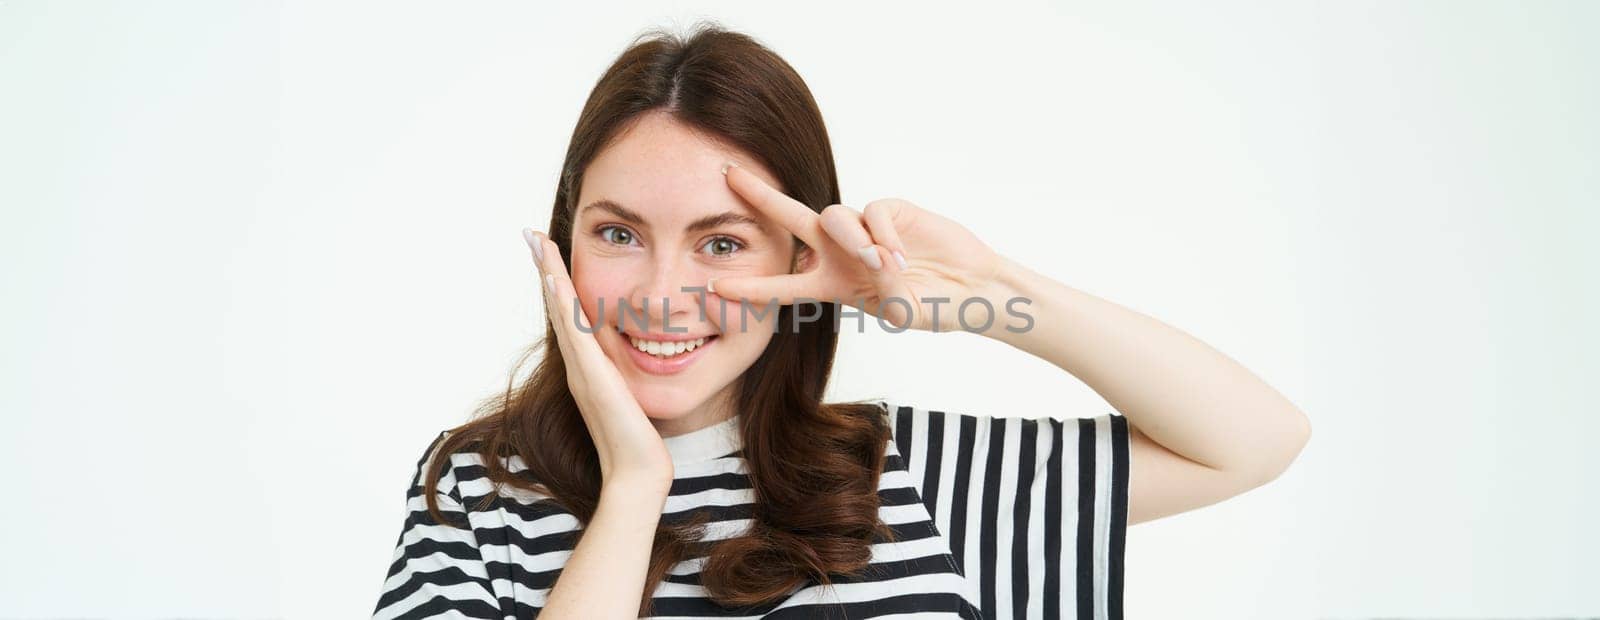 Portrait of beautiful, smiling female model, touches her clear glowing skin, shows peace sign and looks happy at camera, isolate on white background.